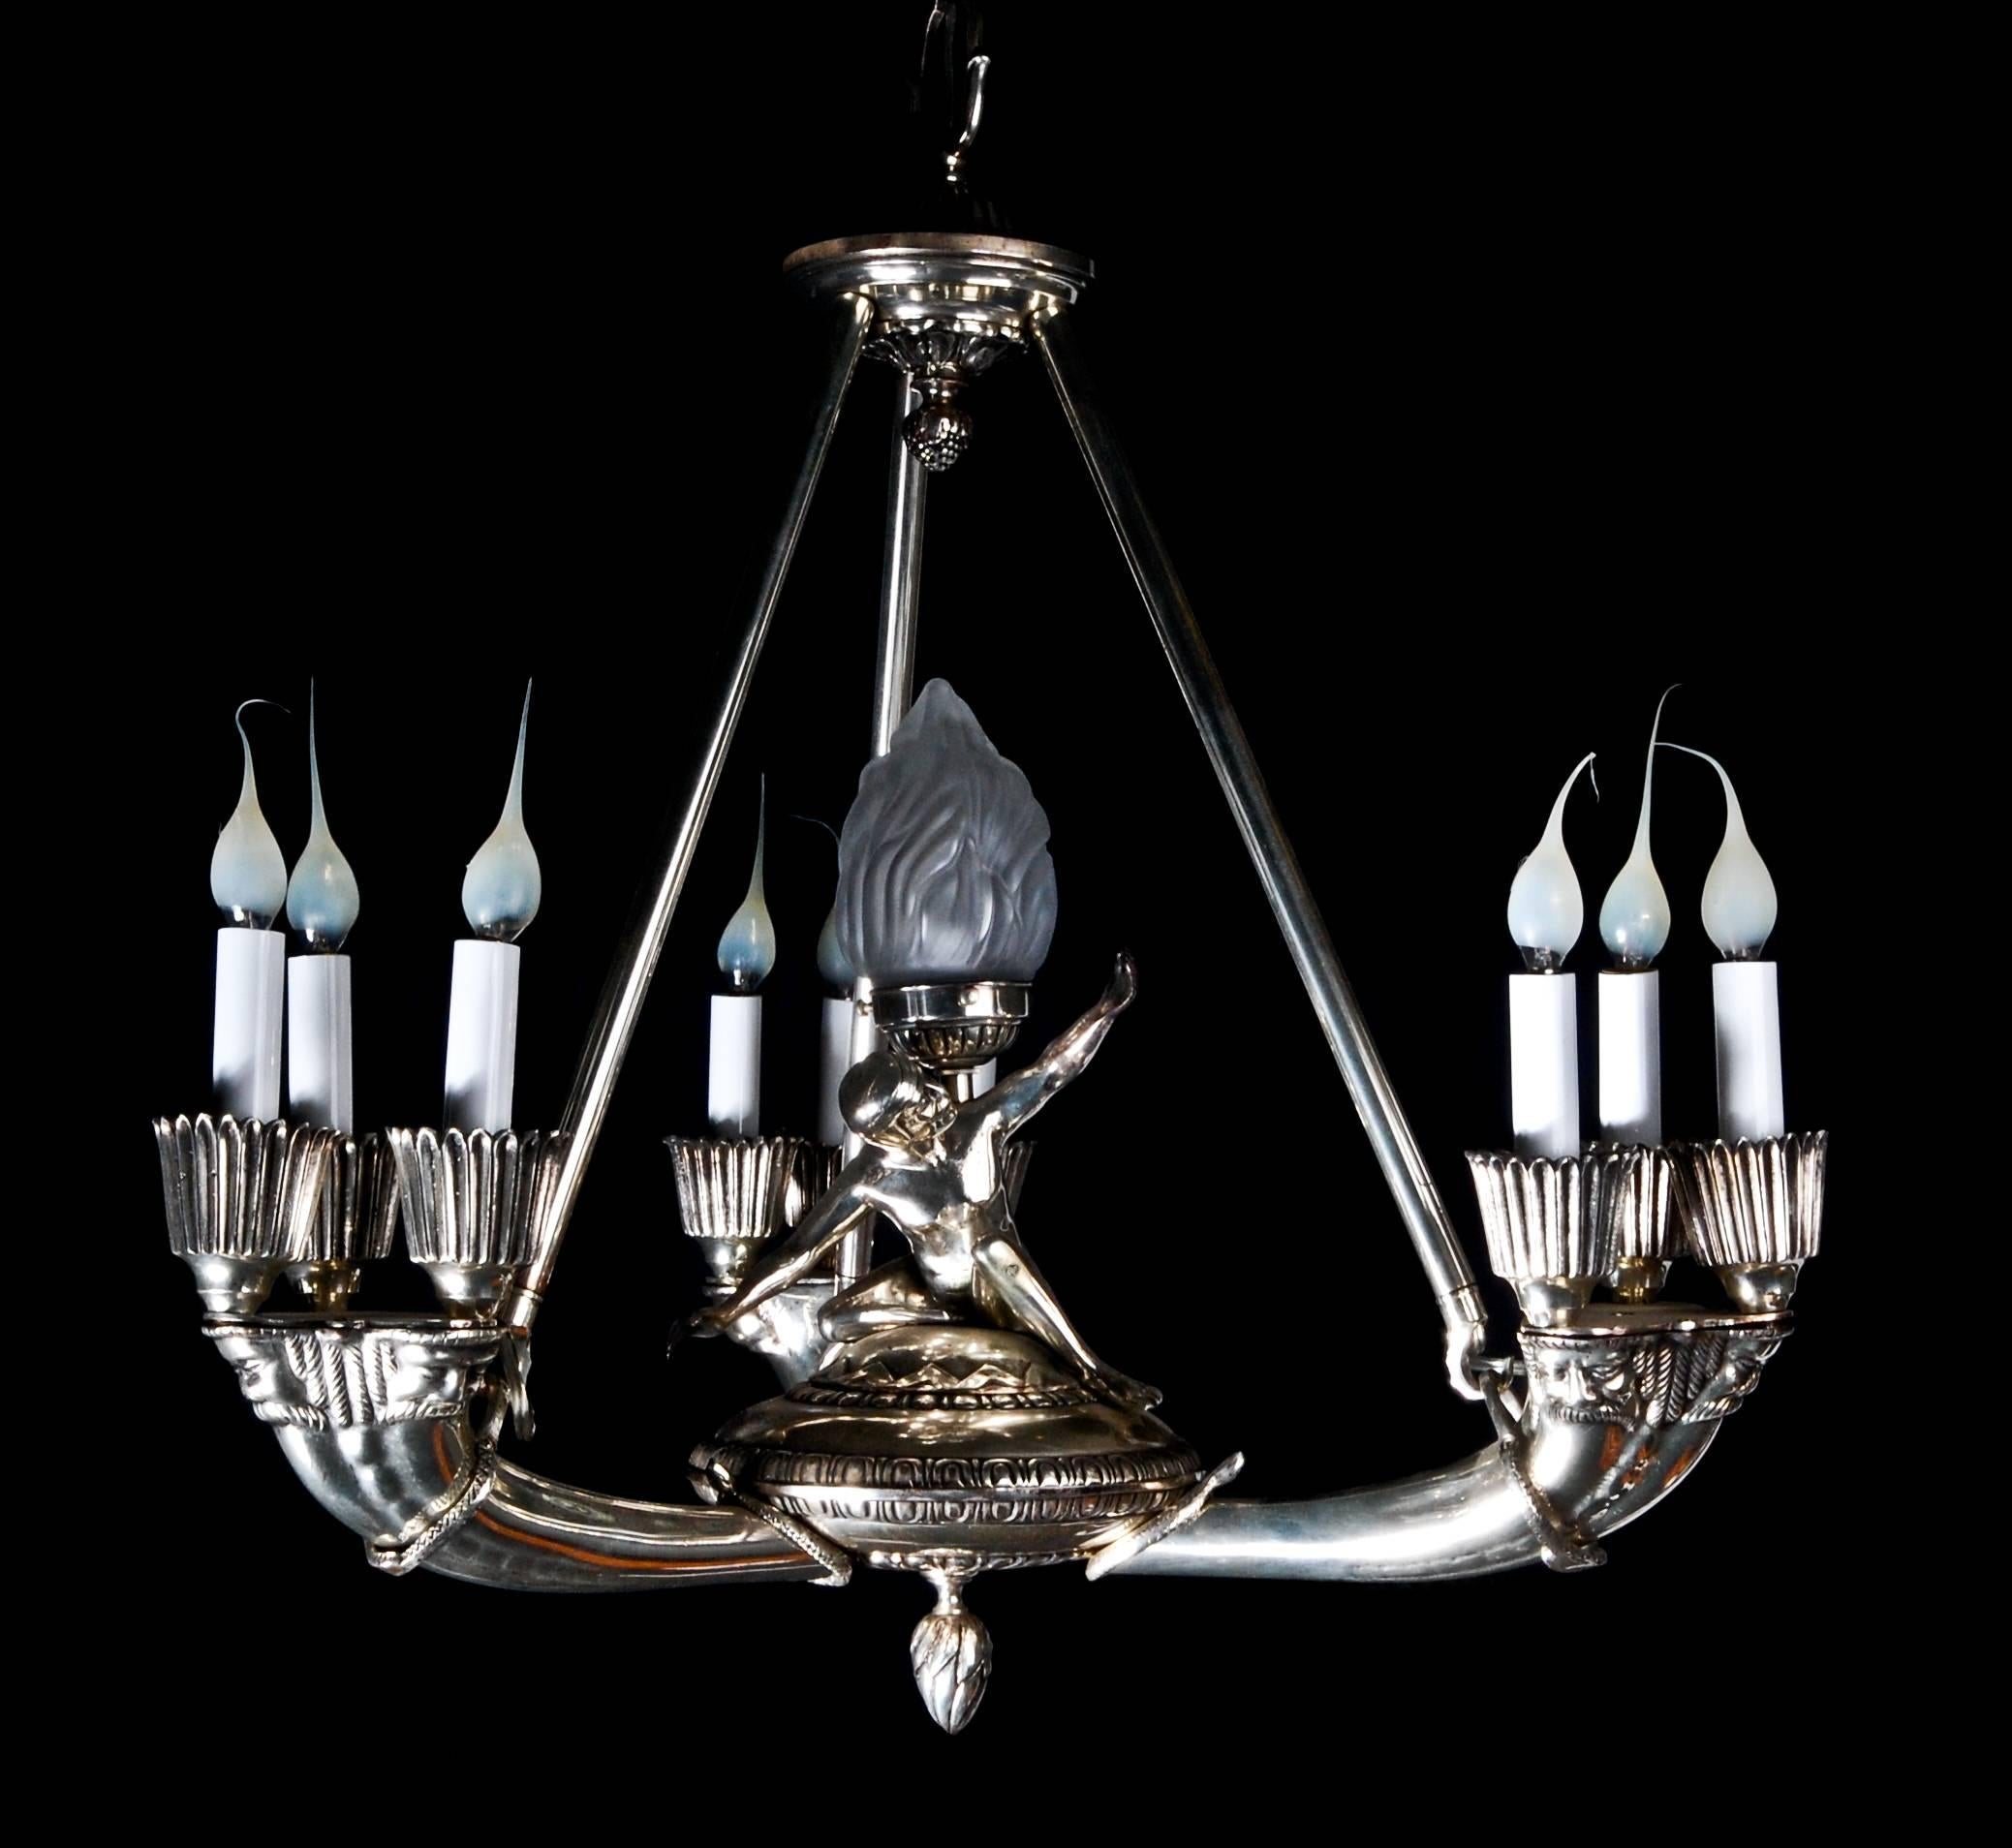 Fine antique french art deco style silvered bronze figural chandelier with a central figure and arms embellished with figural masks.